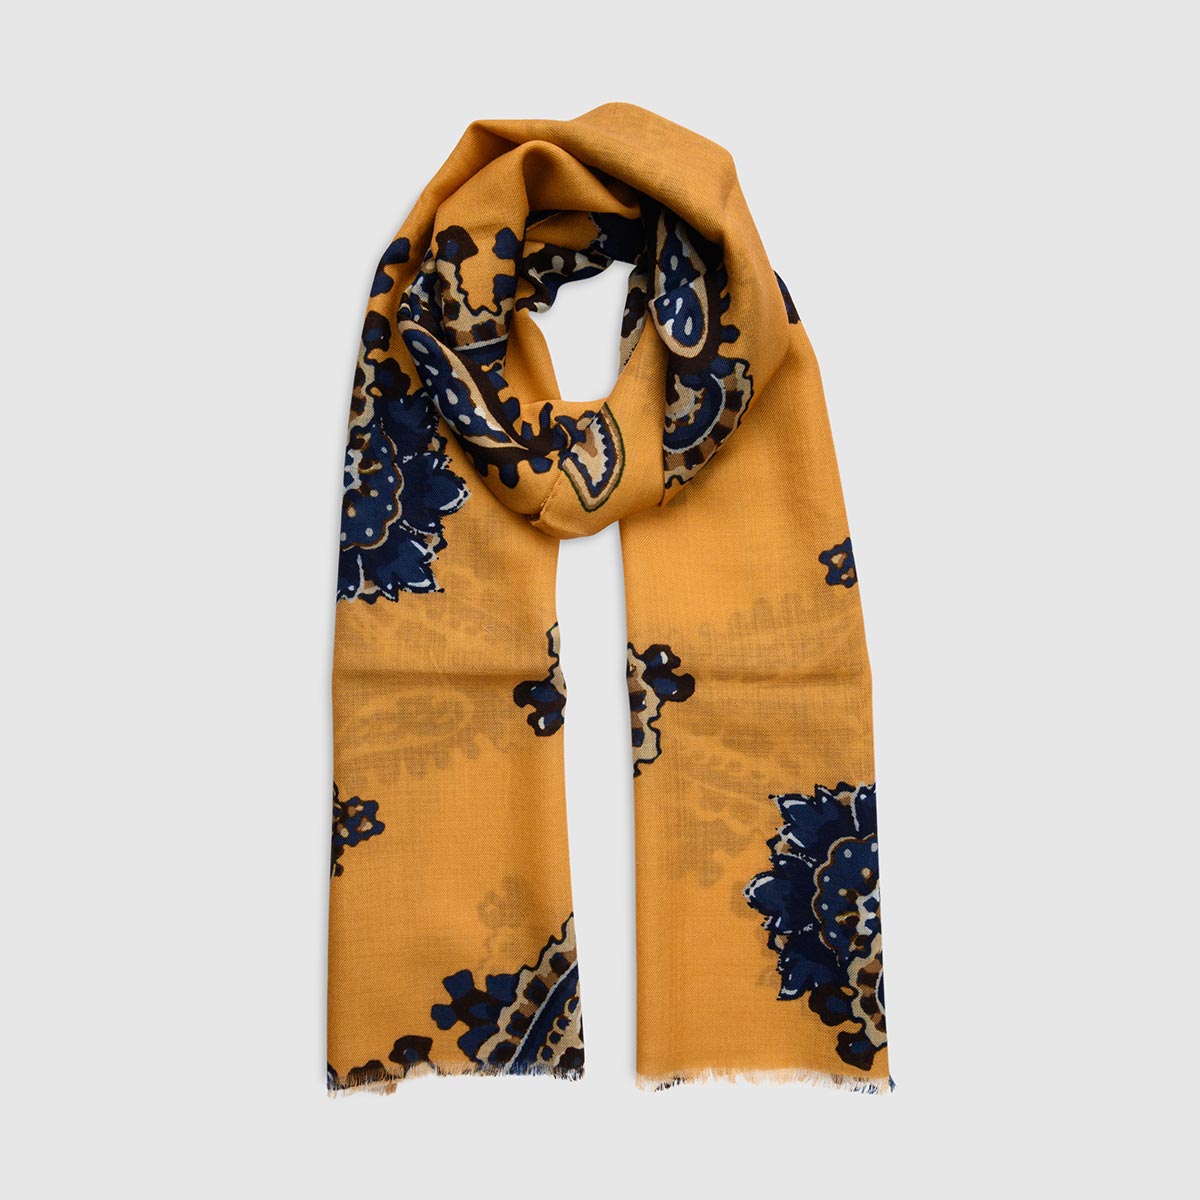 Wool Scarf with Large Kashmir Patterns